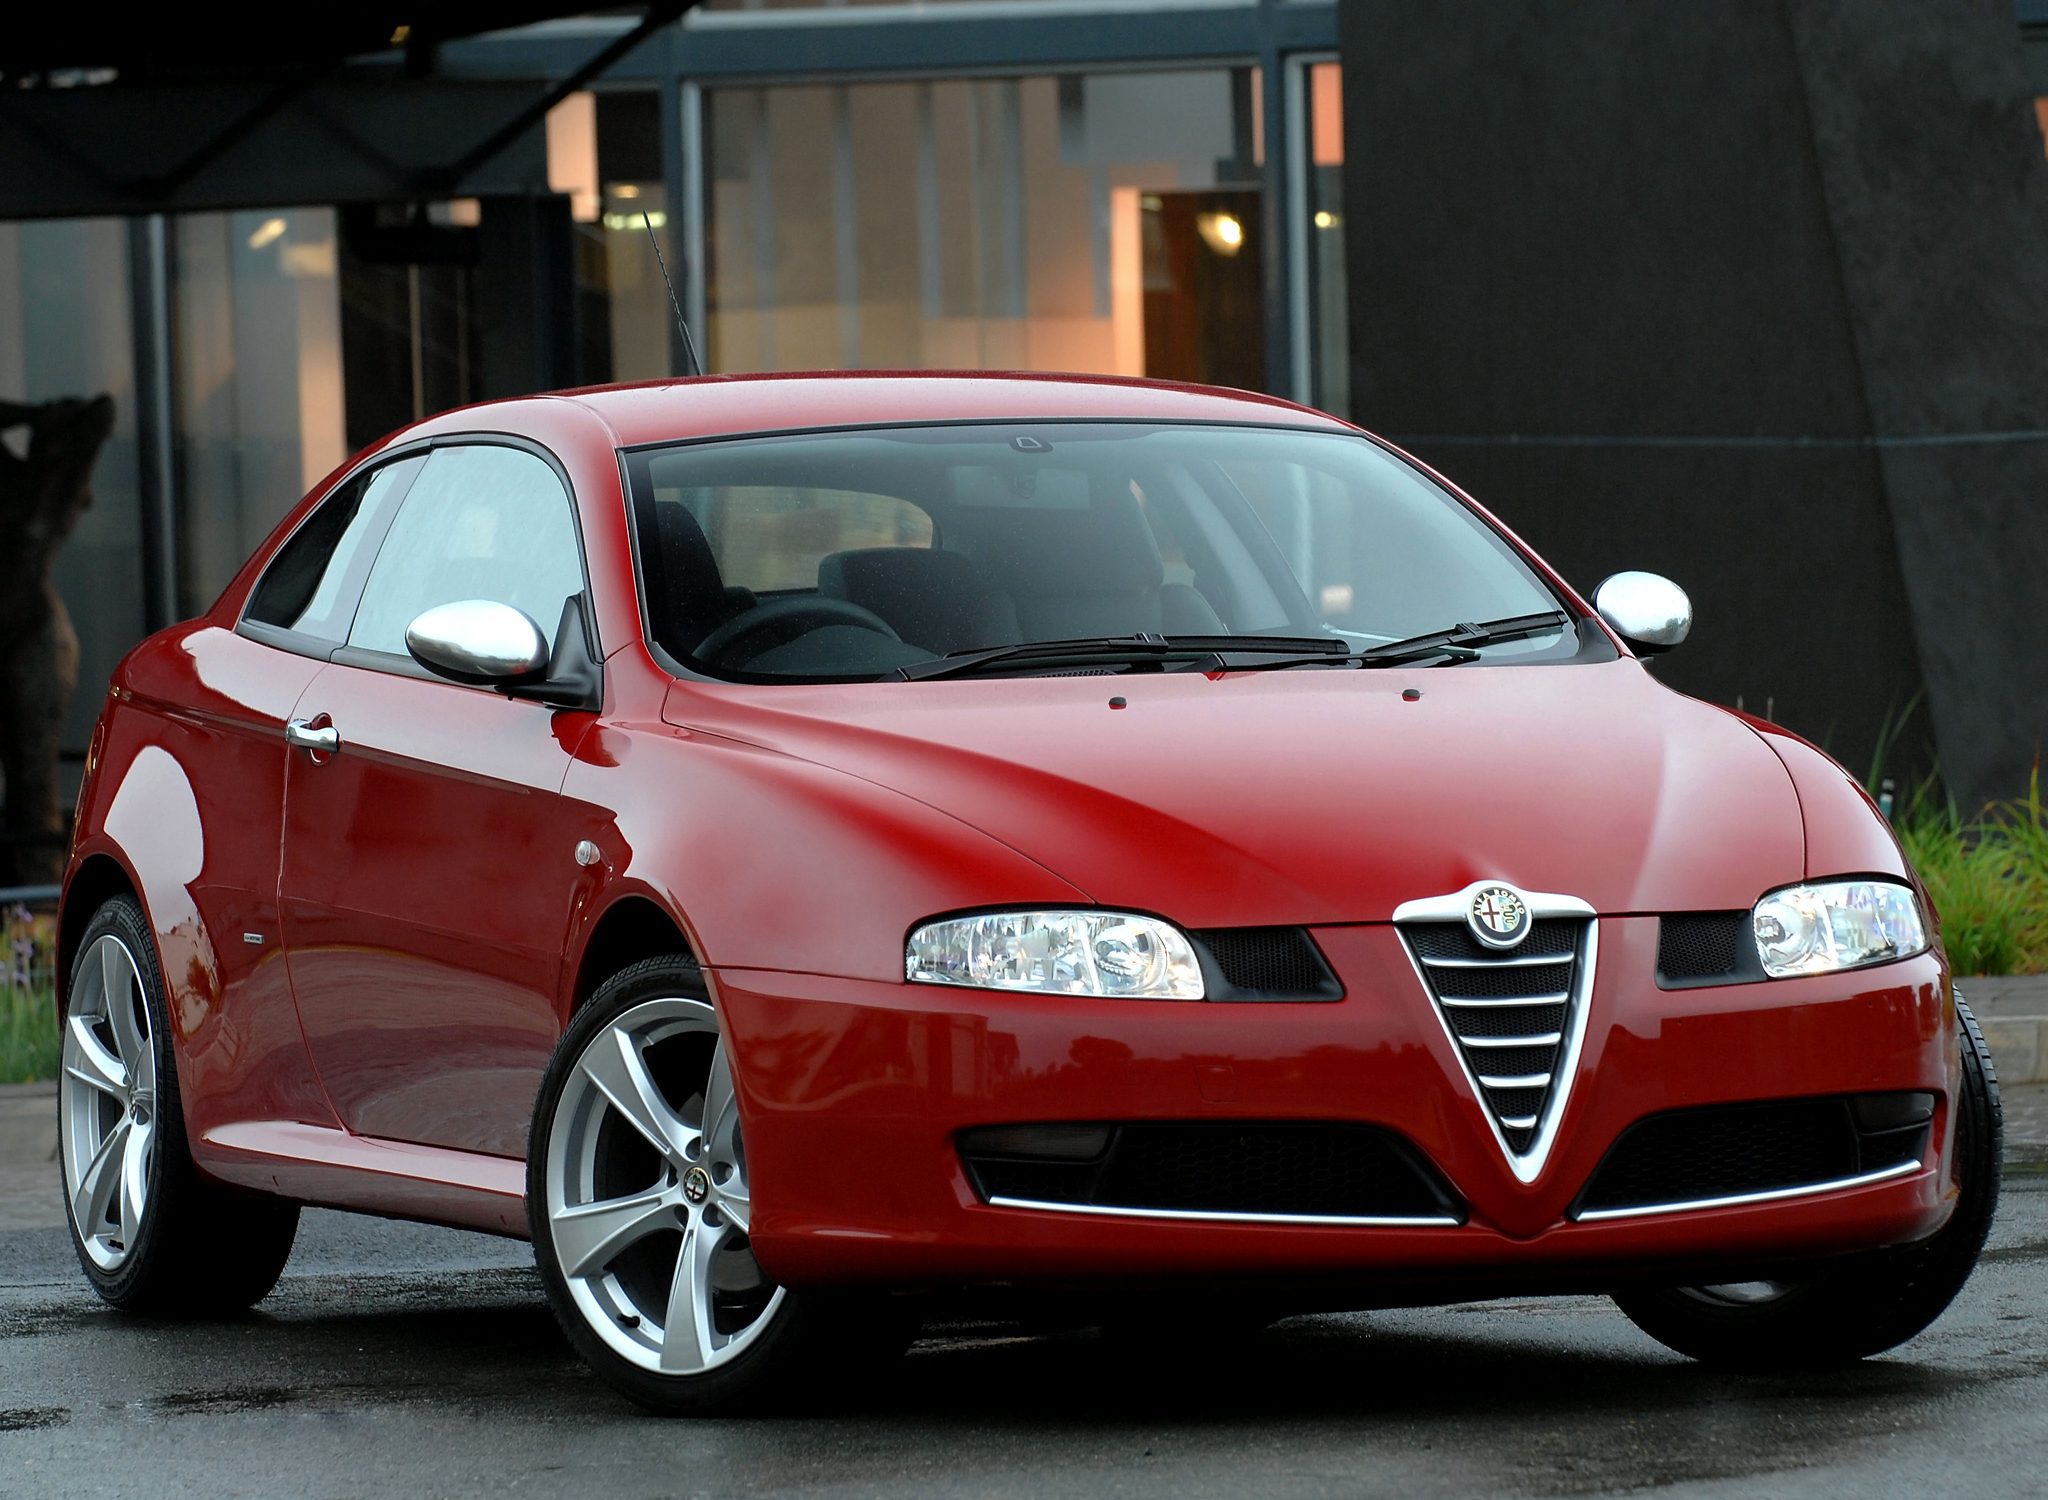 https://www.goodcarbadcar.net/wp-content/uploads/2011/05/pictures_alfa-romeo_gt_2008_4-e1603426182743.jpeg